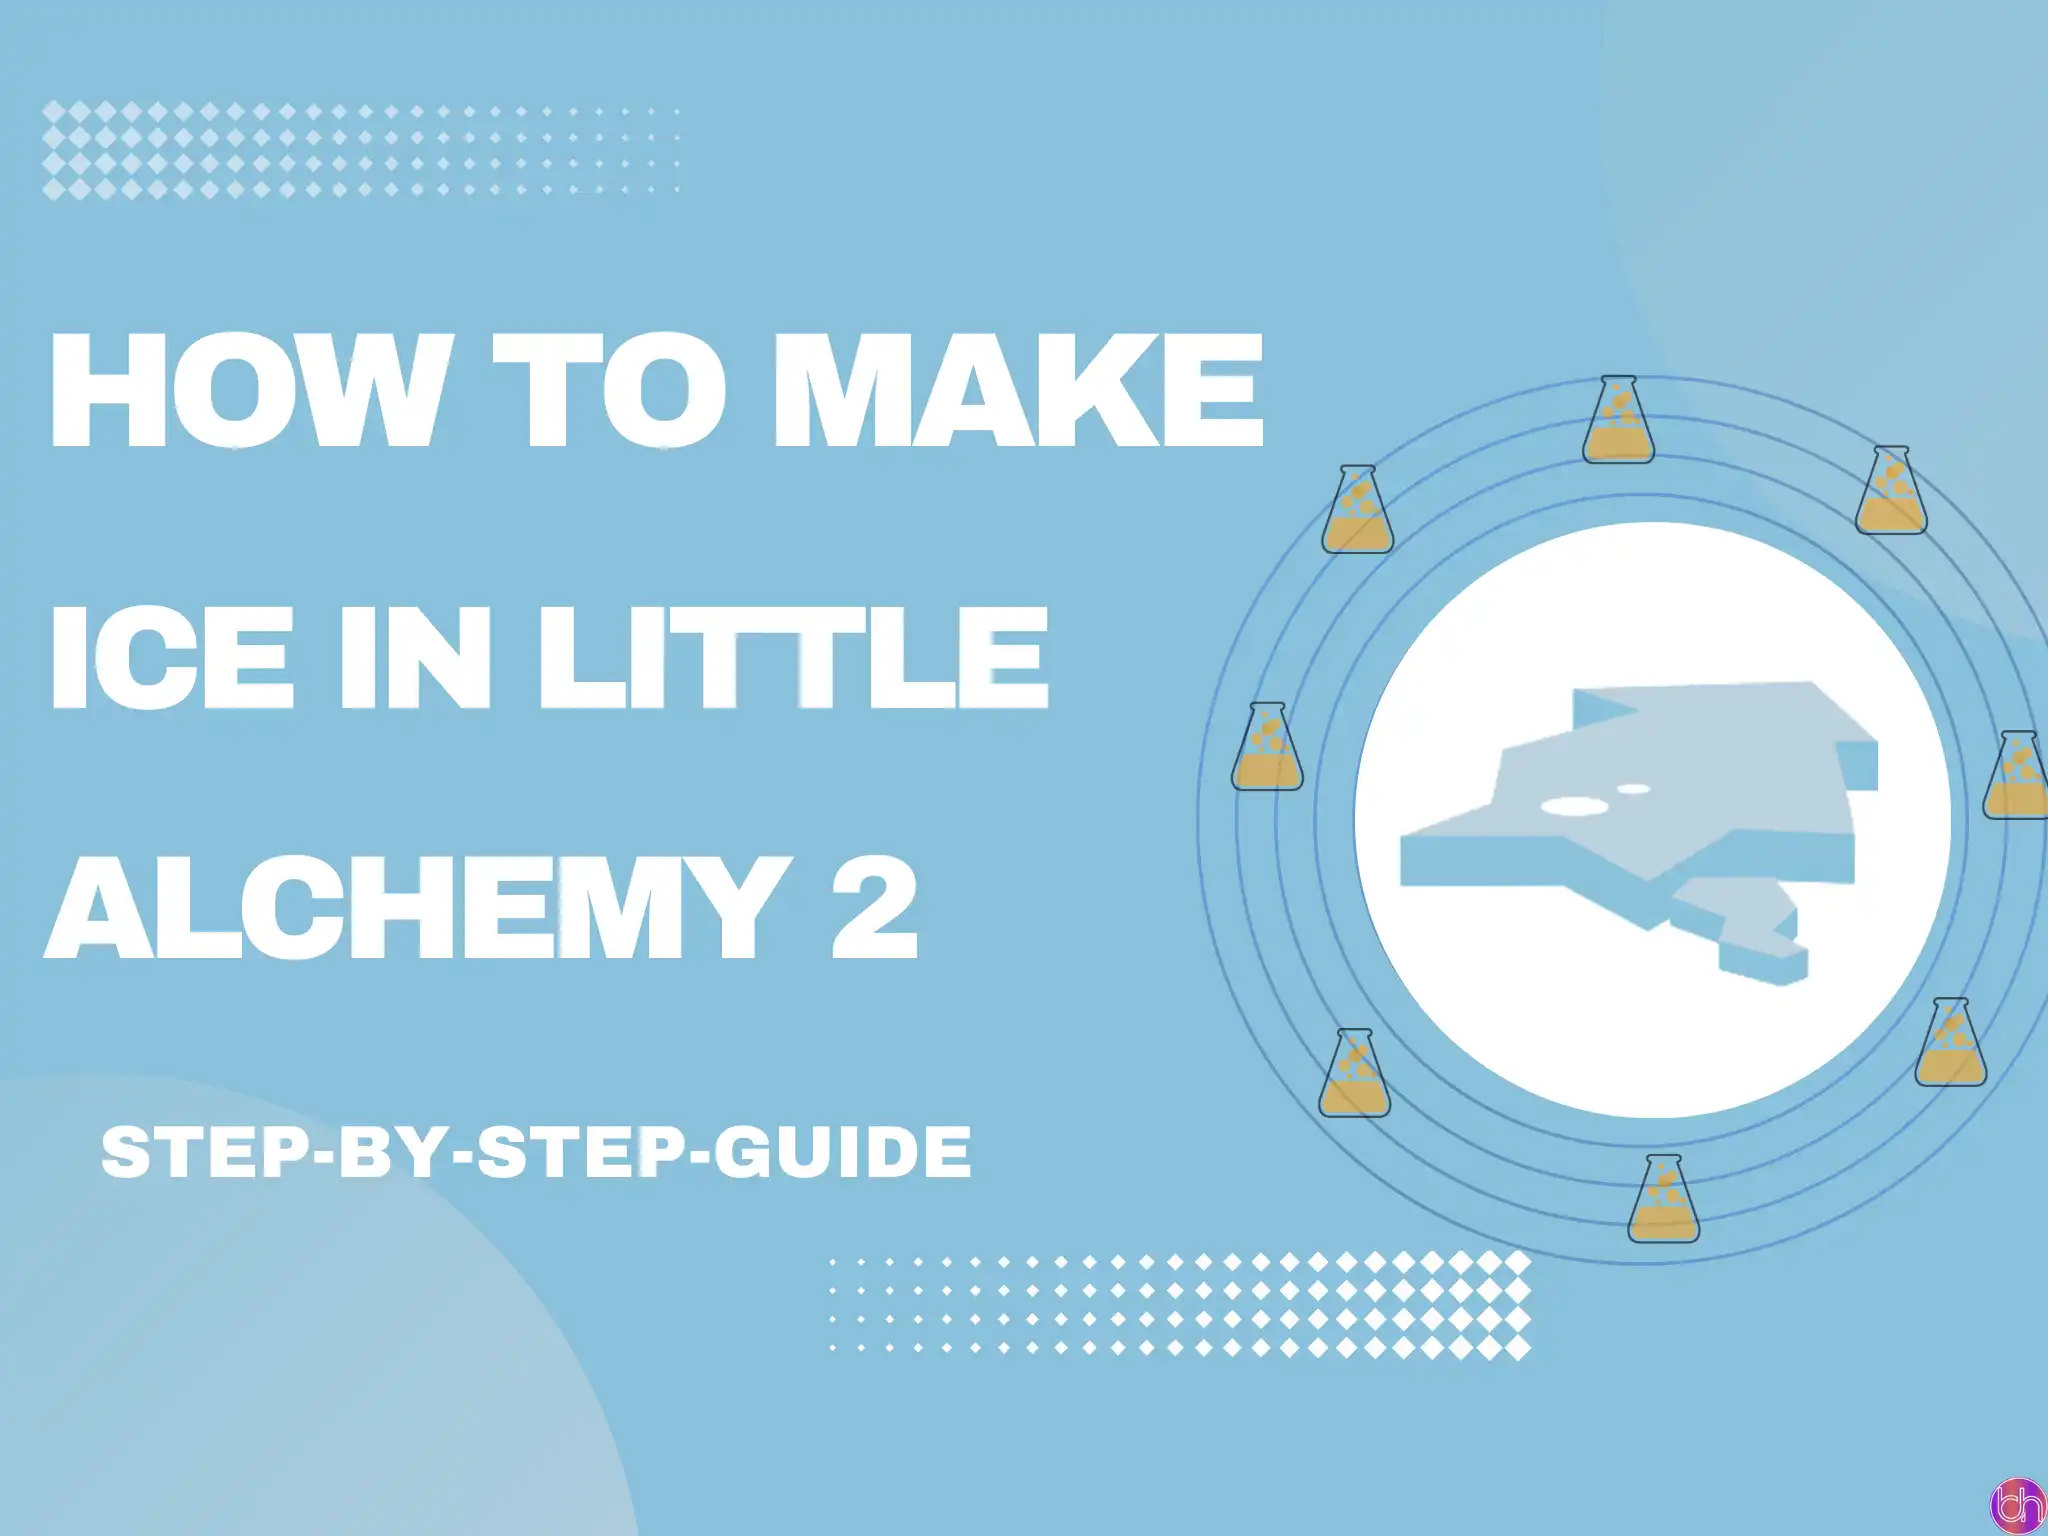 How to make Ice in little alchemy 2